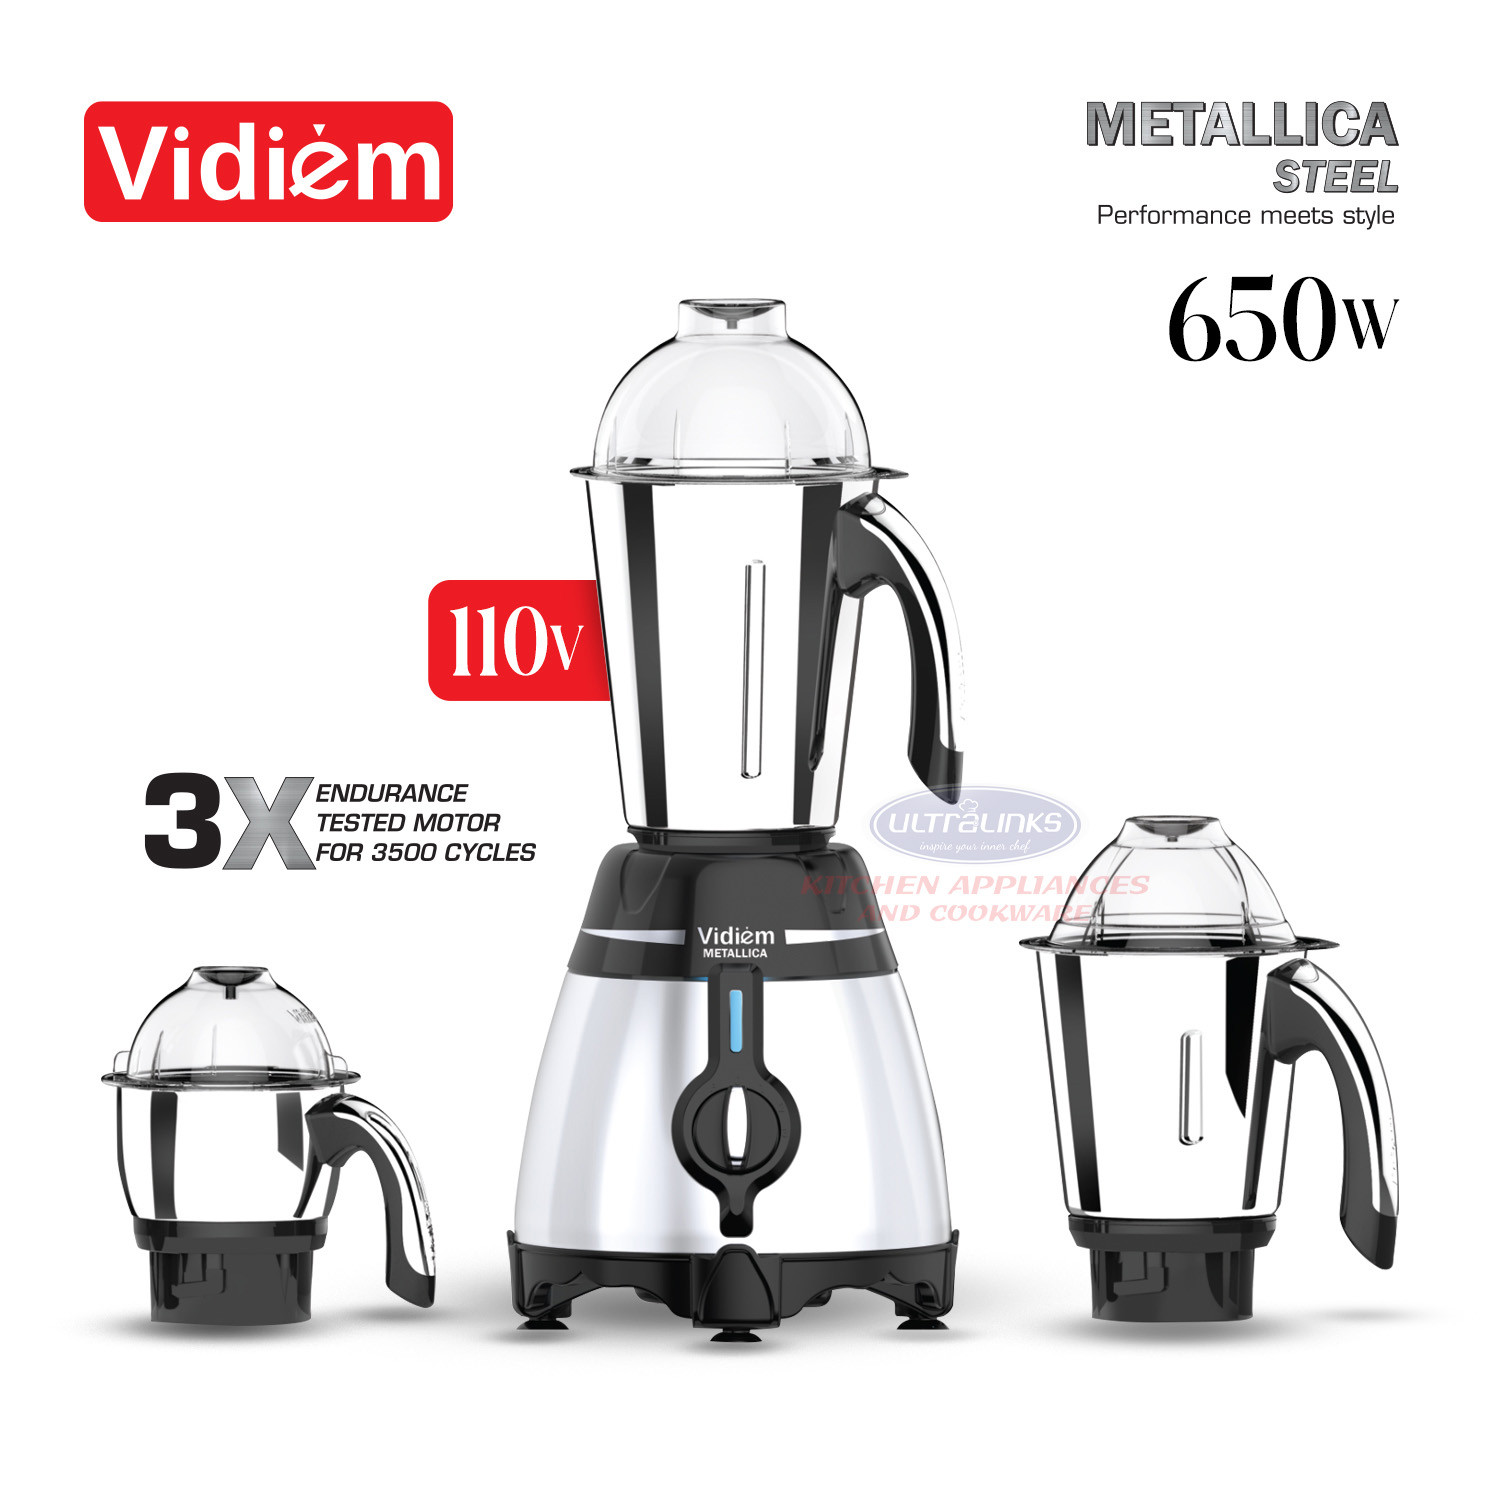 vidiem-metallica-steele-650w-110v-stainless-steel-jars-indian-mixer-grinder-with-spice-coffee-grinder-jar-for-use-in-canada-usa